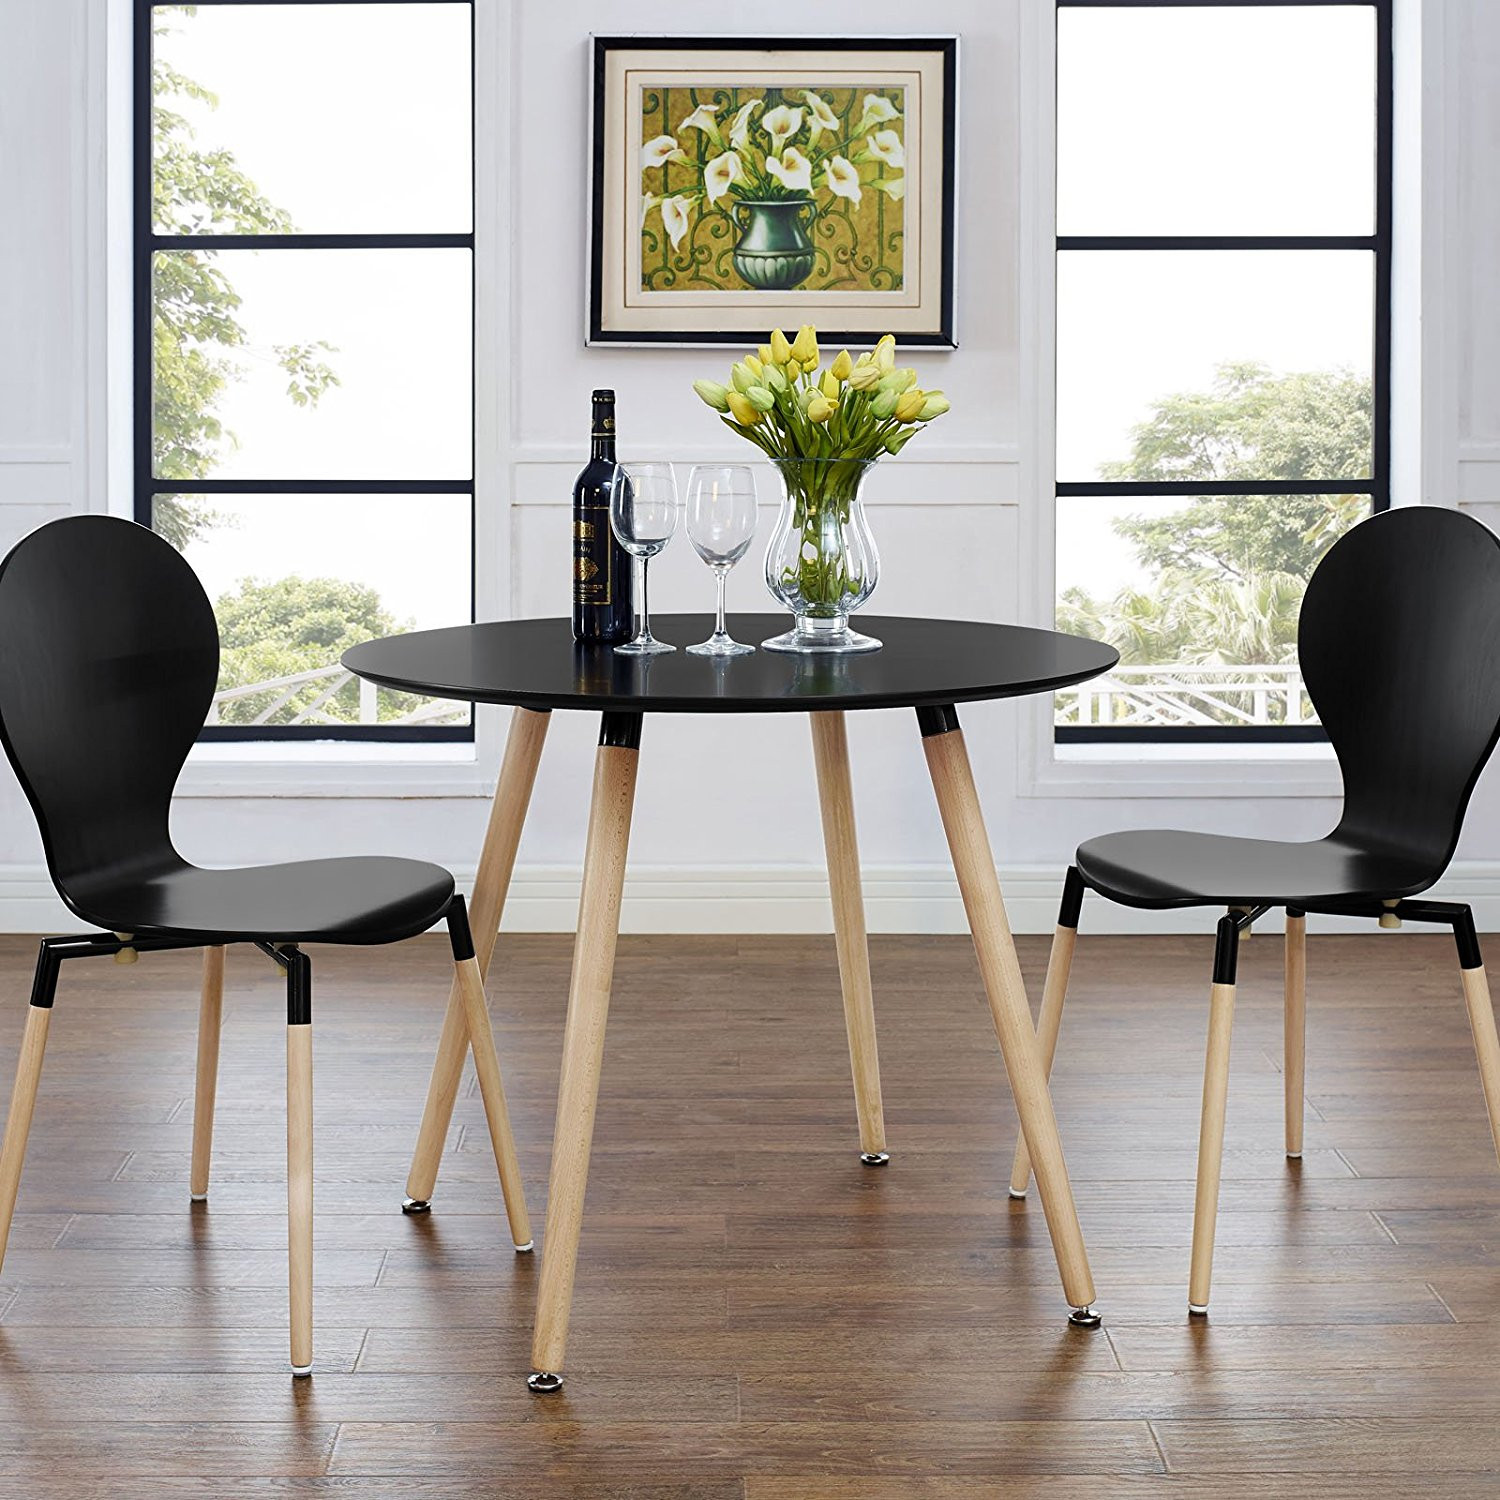 Living Spaces Dining Table
 Twenty dining tables that work great in small spaces